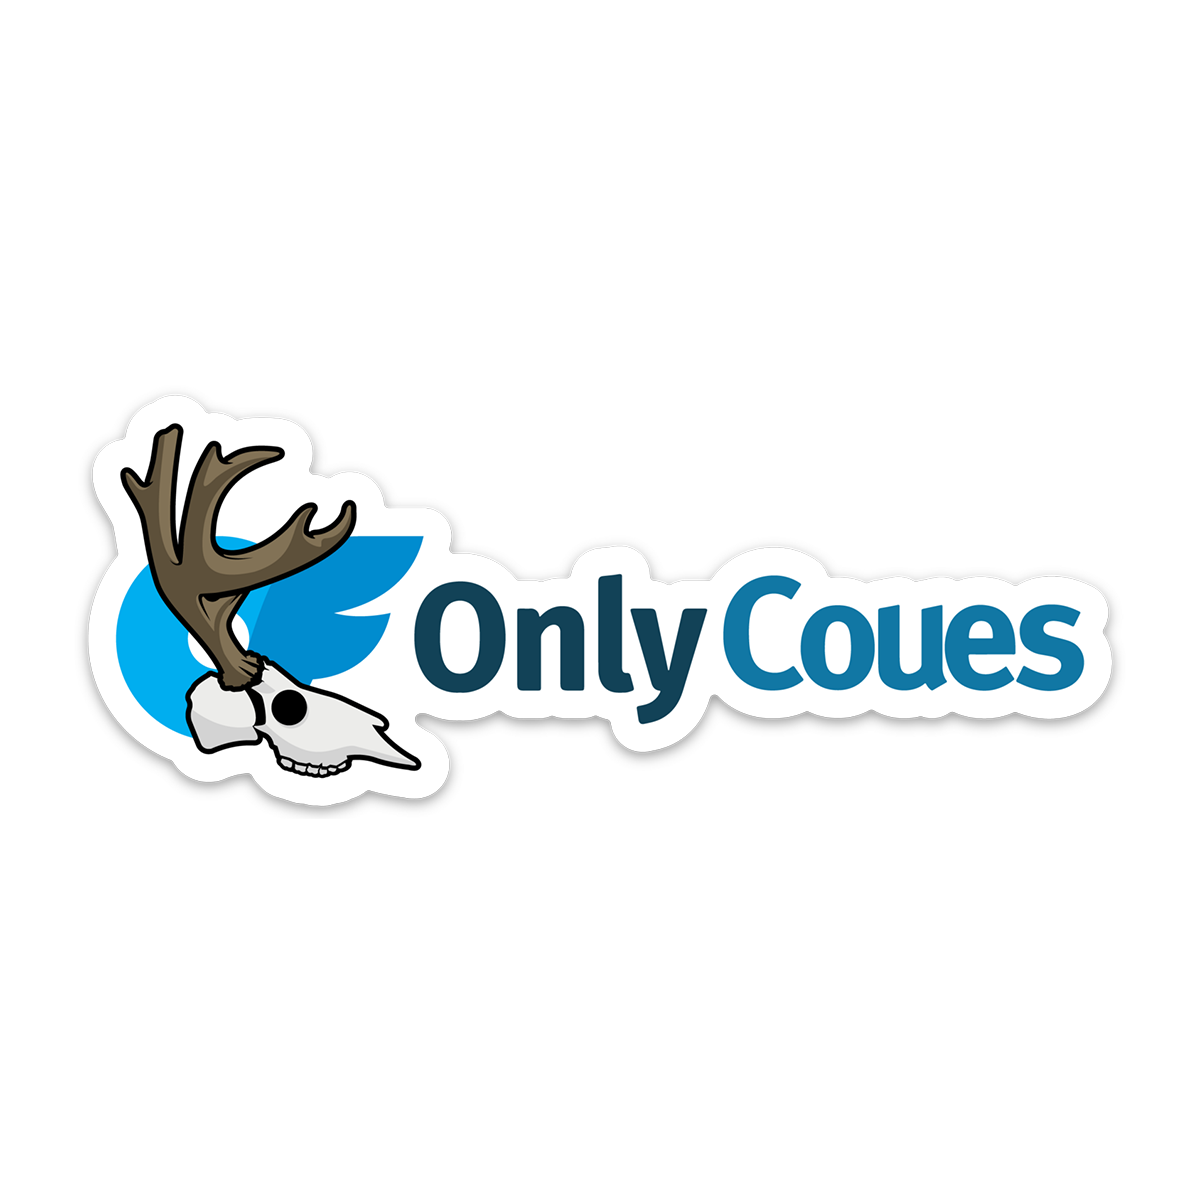 Only Coues Sticker